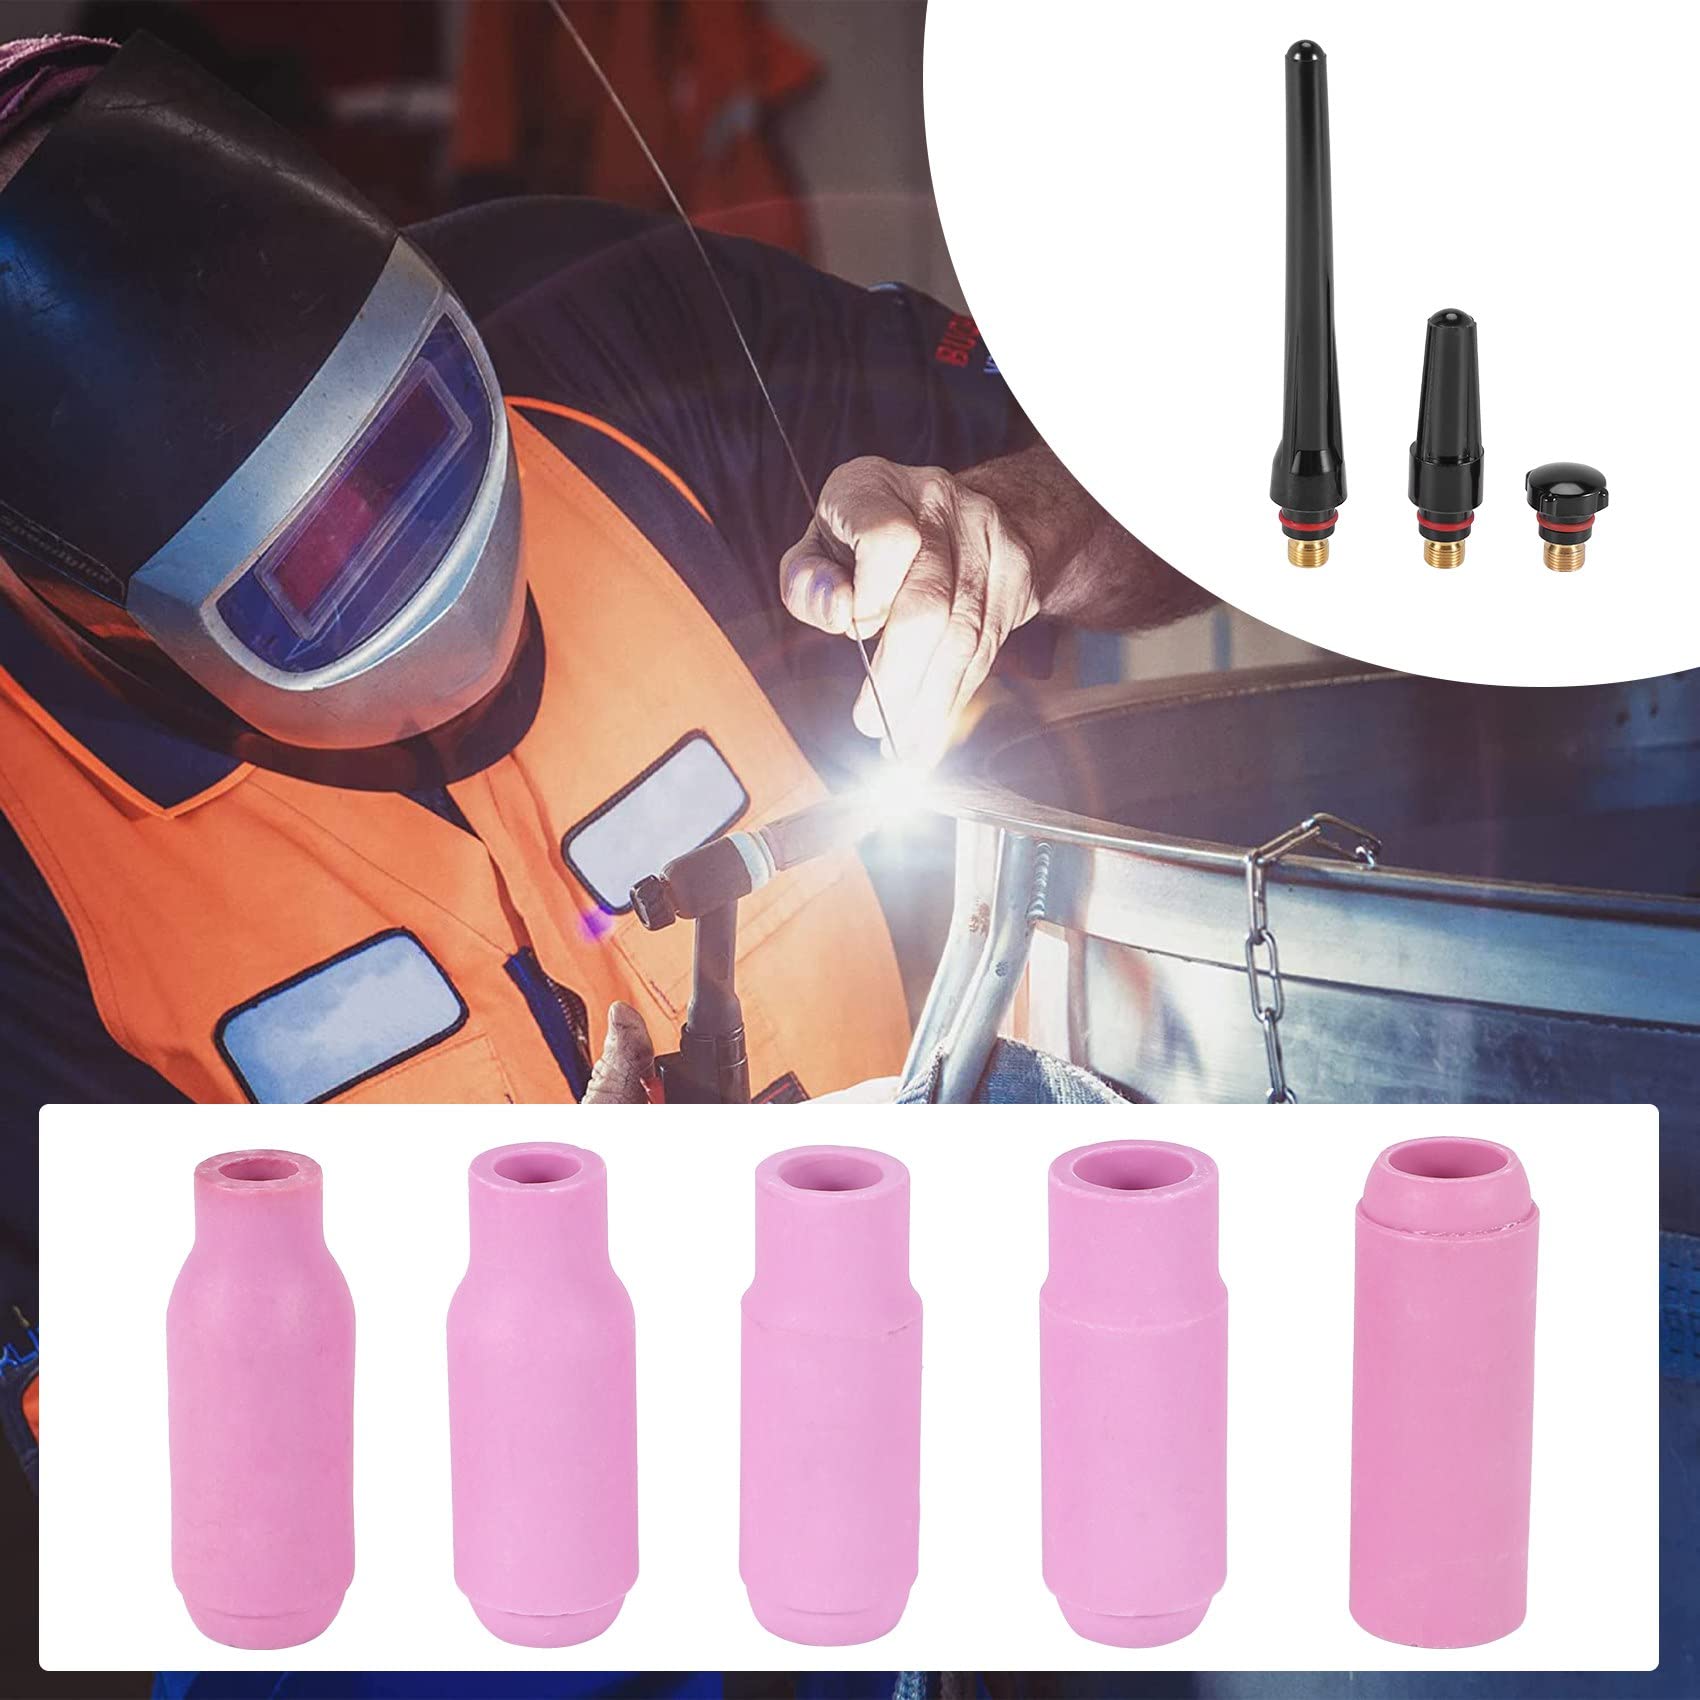 Sudemota 17Pcs Welders Welding Torch Tig Cup Collet Body Nozzle Kit Tungsten Electrode For -17/18/26 Tig Welding Torch